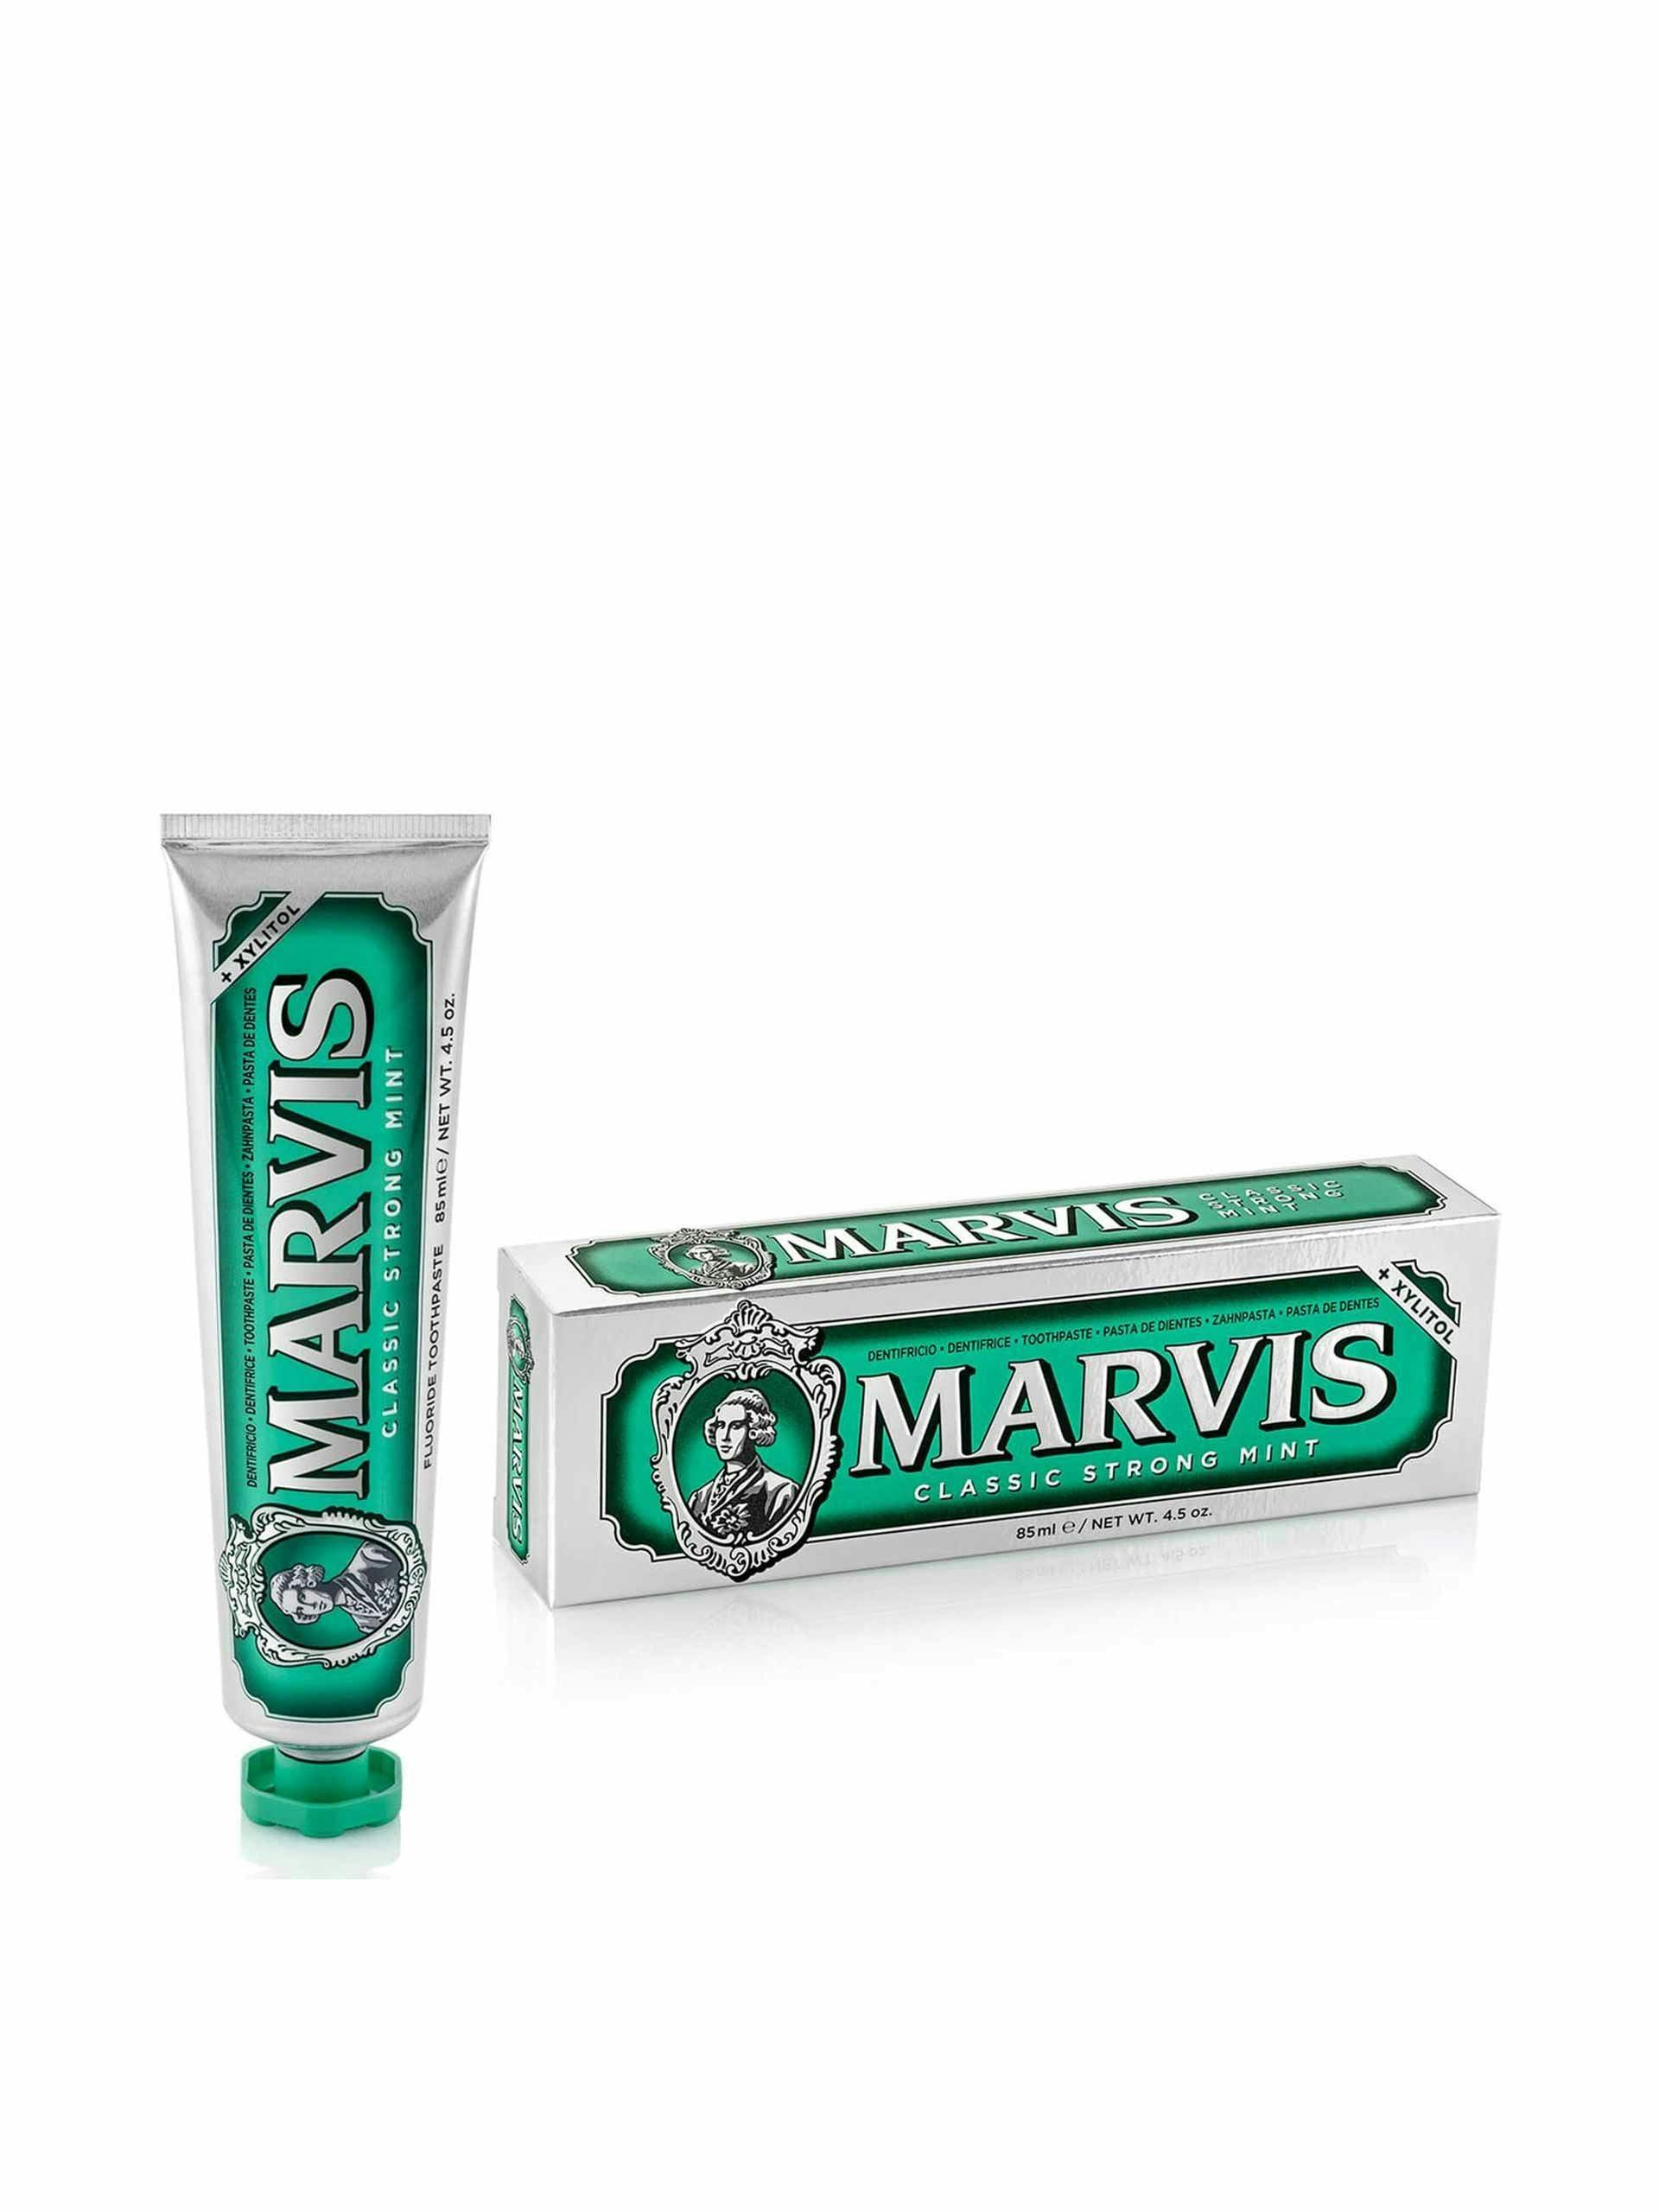 Marvis classic strong mint toothpaste